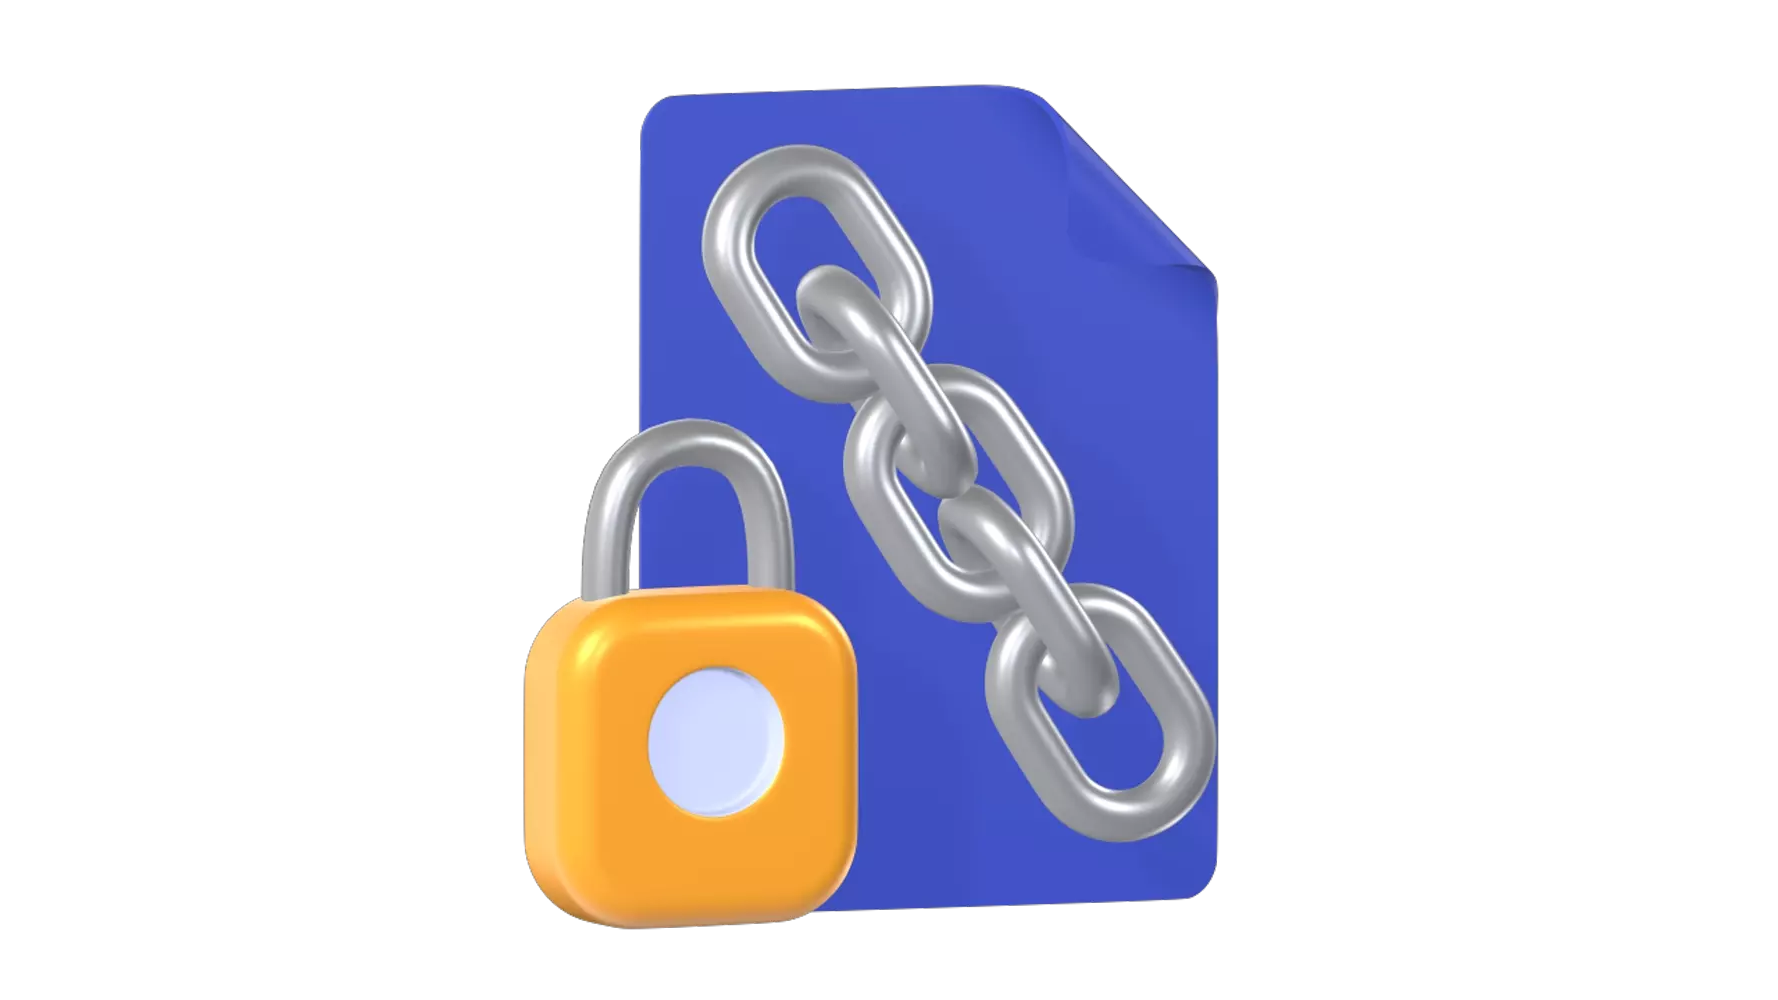 Encrypted File 3D Graphic